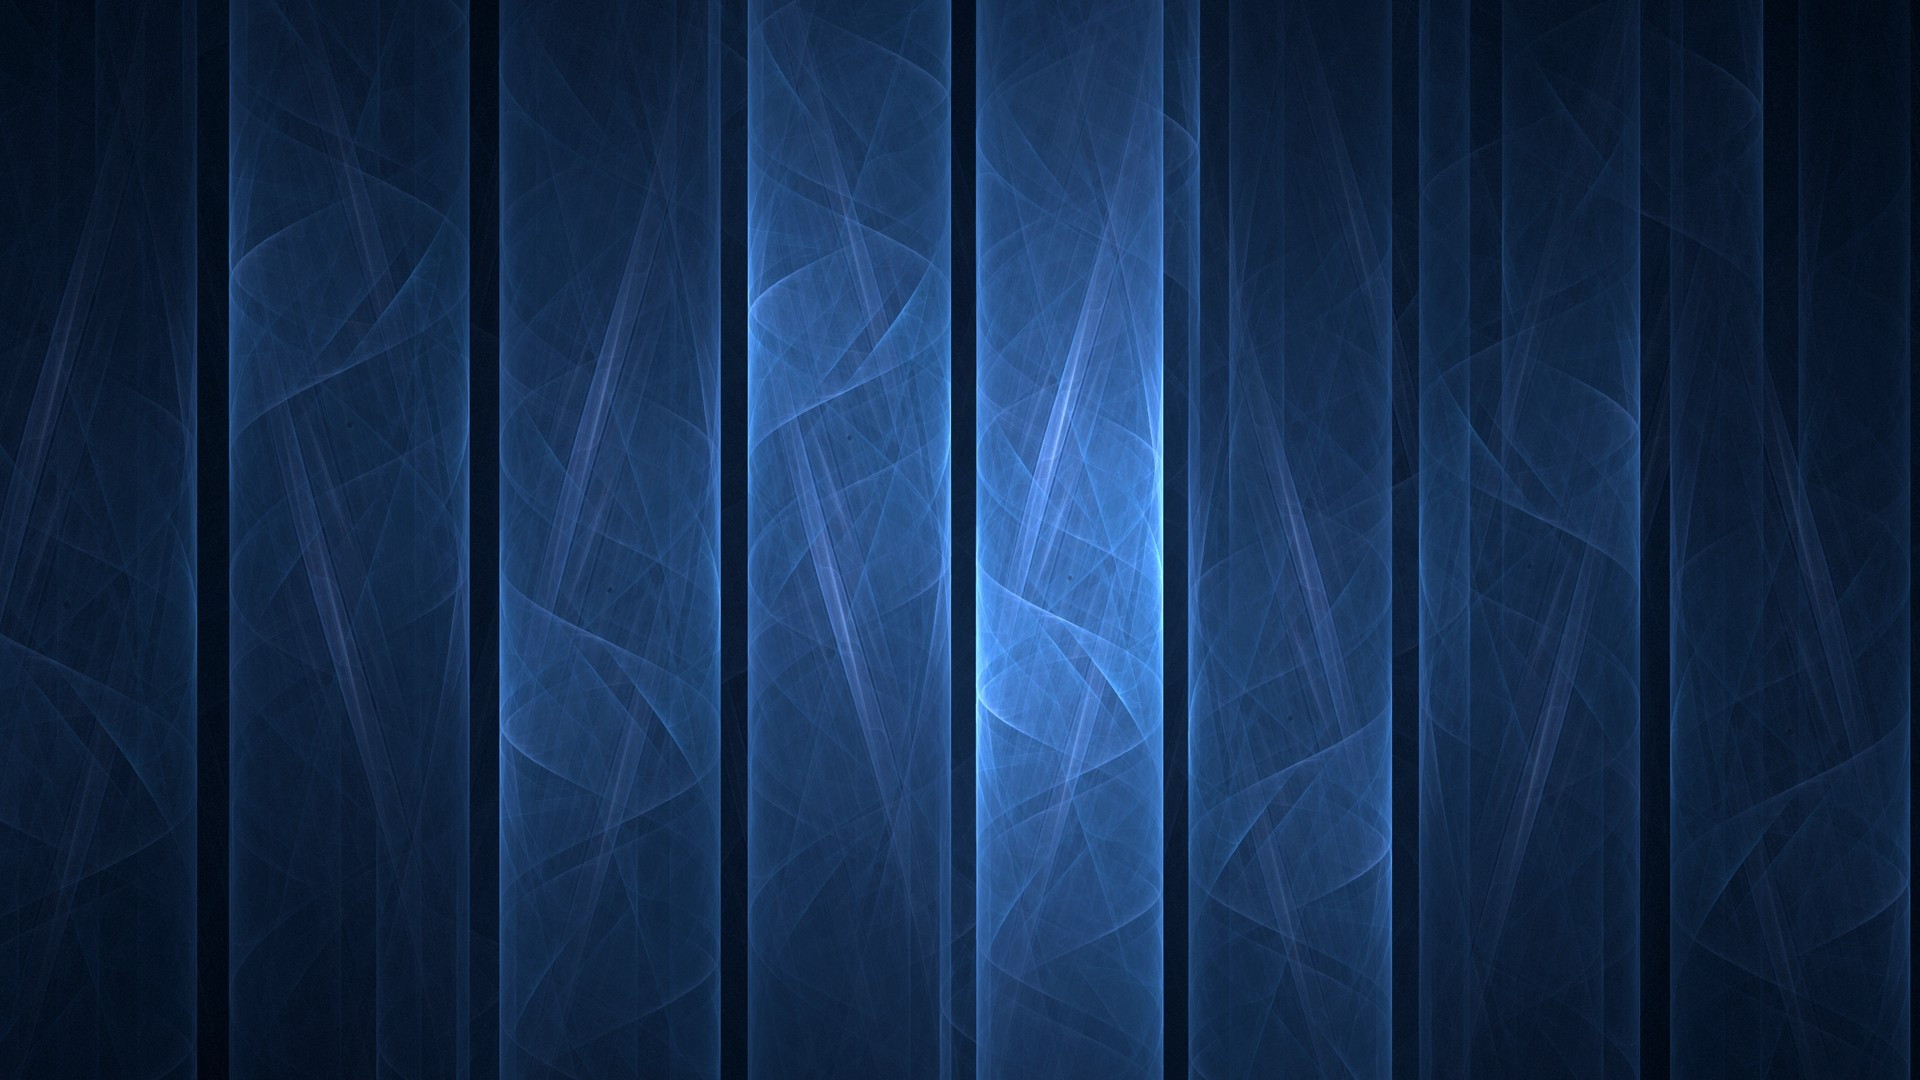 Wallpaper Blue Desktop With high-resolution 1920X1080 pixel. You can use this wallpaper for your Windows and Mac OS computers as well as your Android and iPhone smartphones